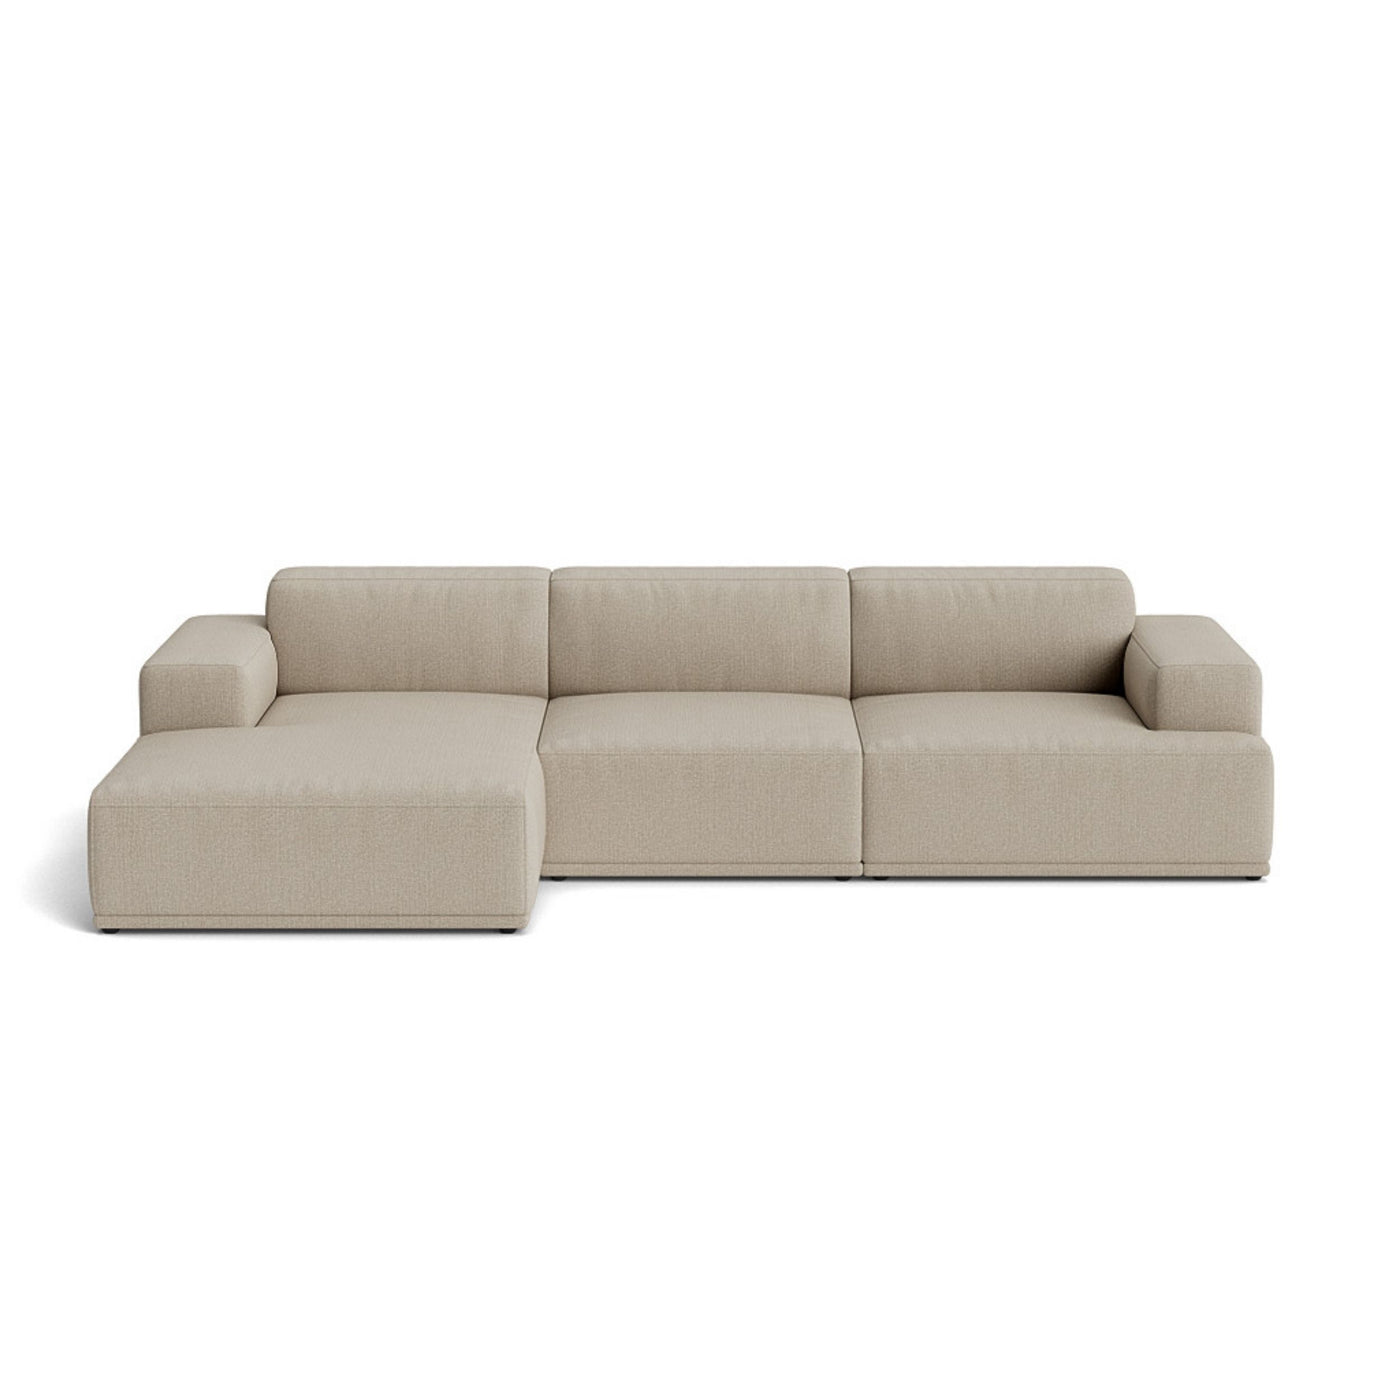 Muuto Connect Soft Modular 3 Seater Sofa, configuration 2. Made-to-order from someday designs. #colour_clay-10